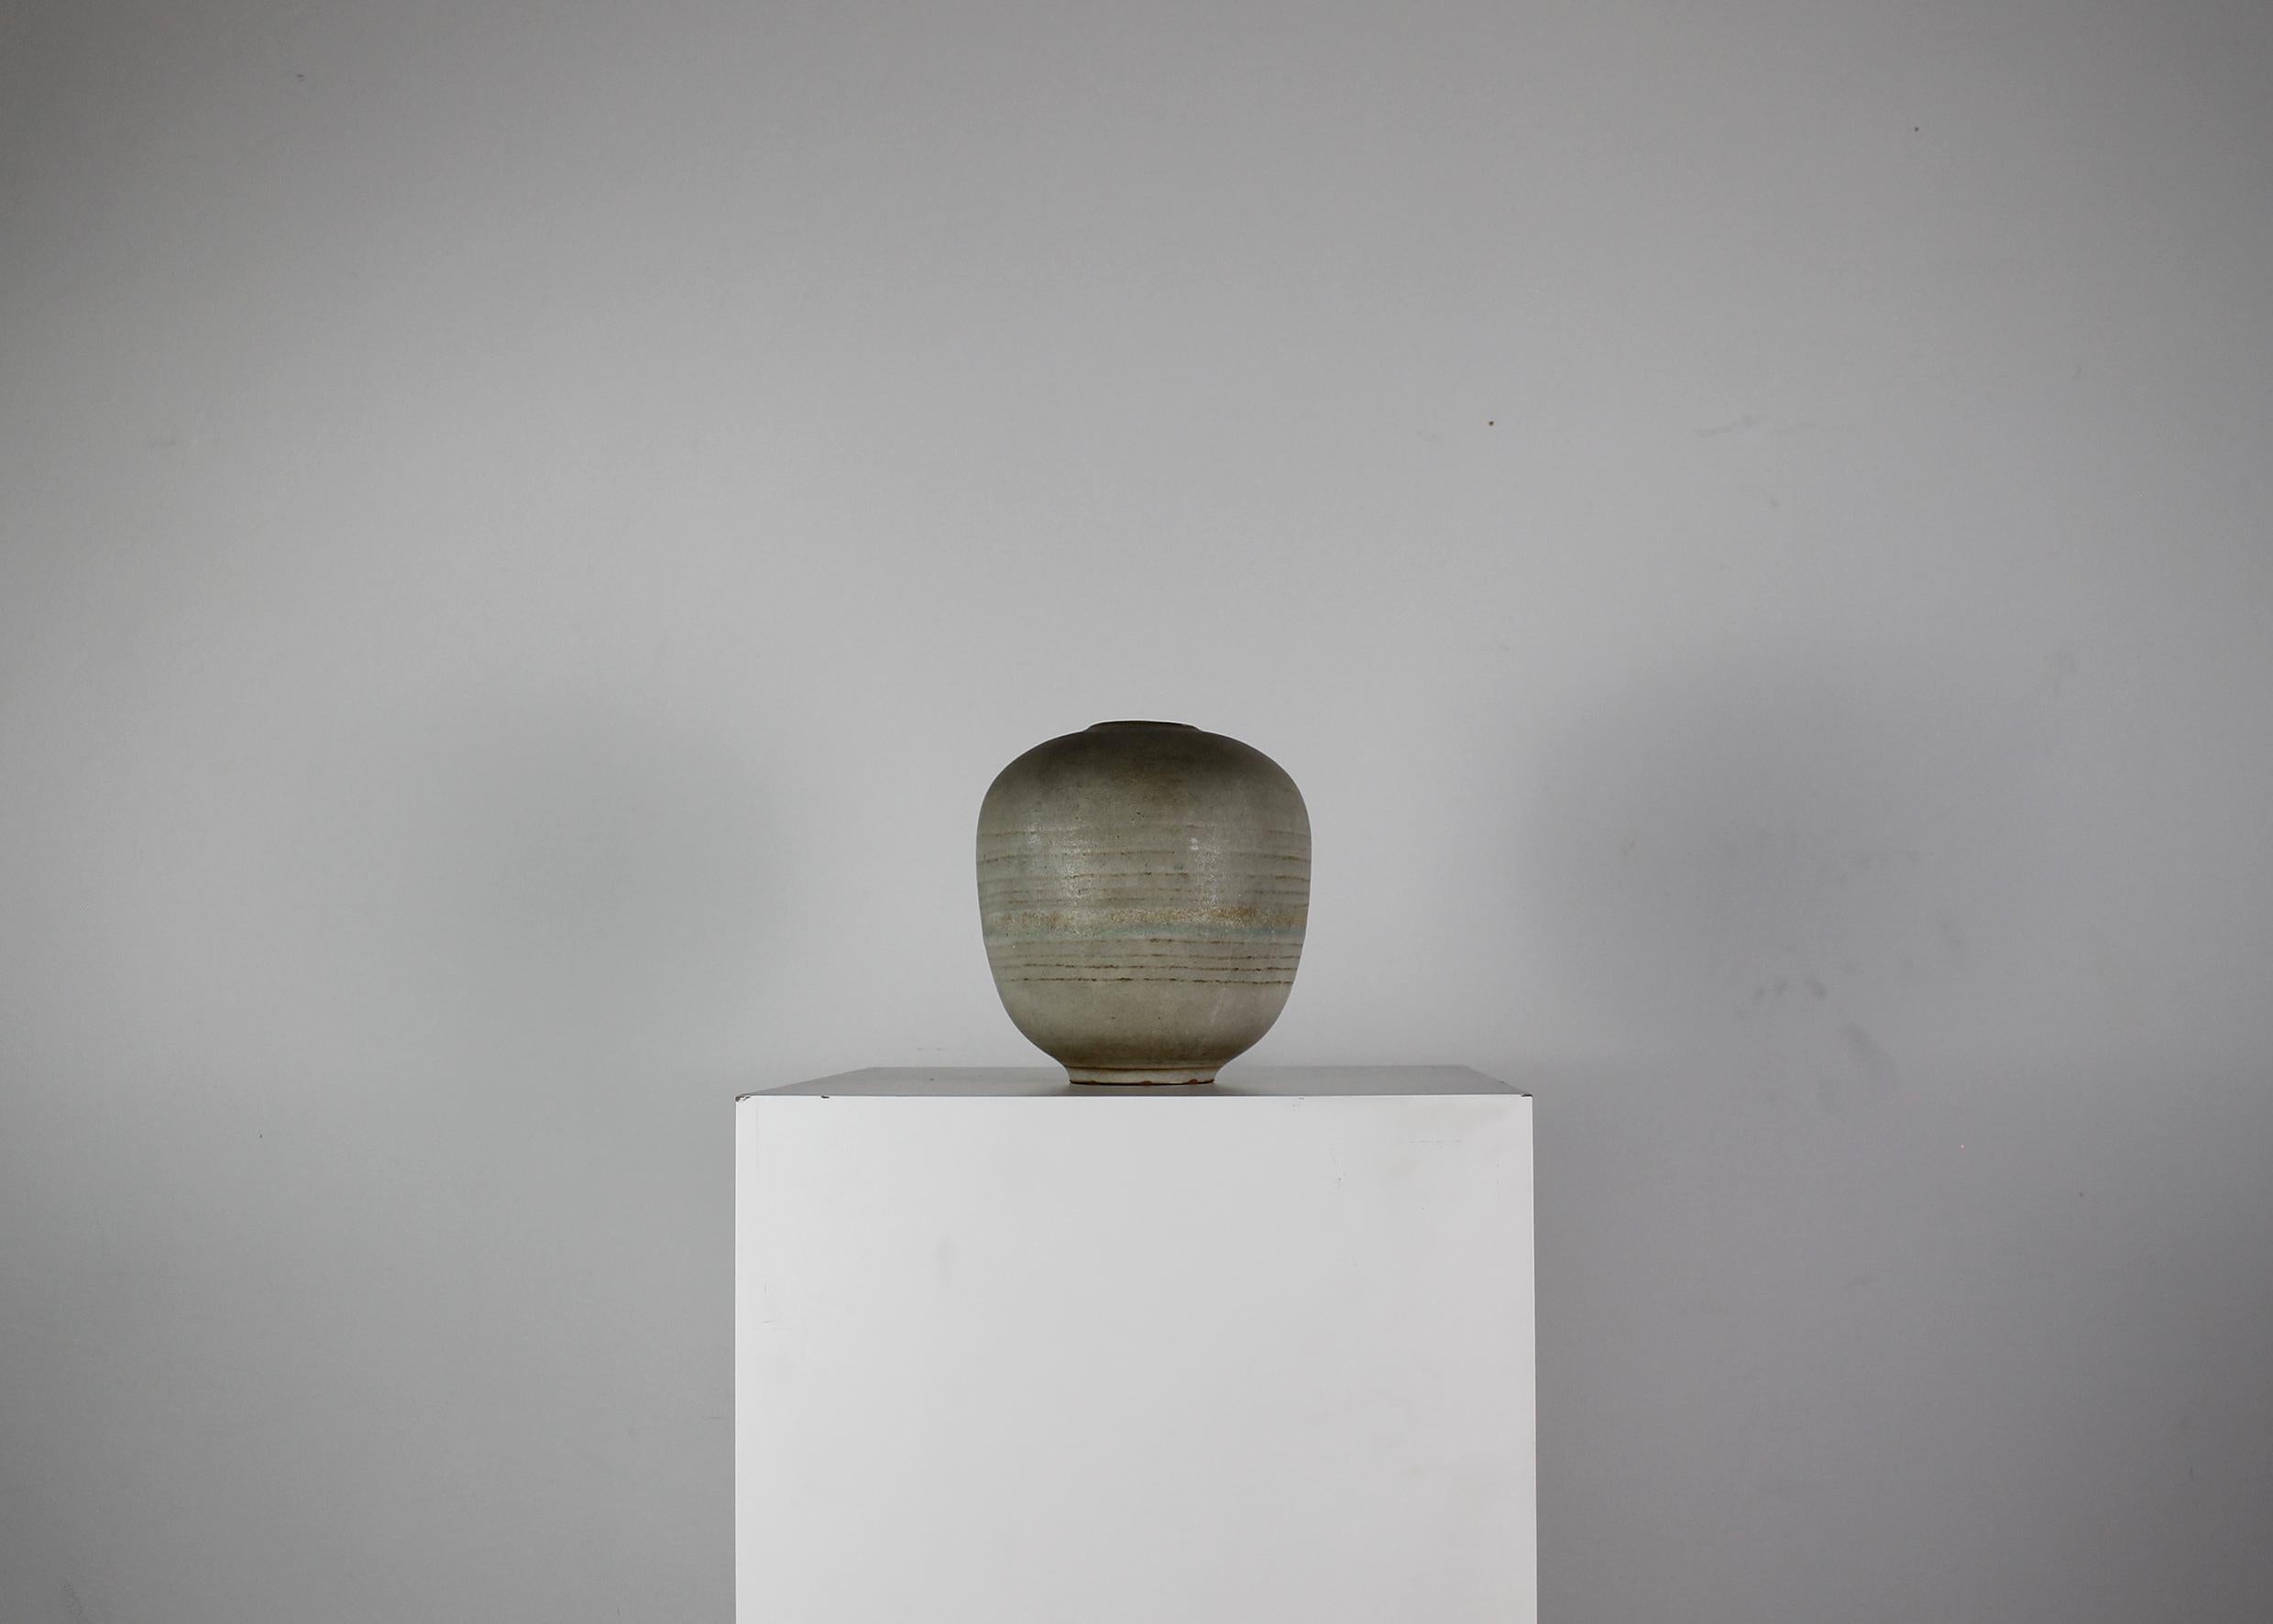 Rare round-shaped vase realized in a warm gray stoneware with band decorations, designed and manufactured by Carlo Zauli in 1960s. 

Signature engraved visible under the base.

After winning the main awards dedicated to ceramic art in the 1950s,